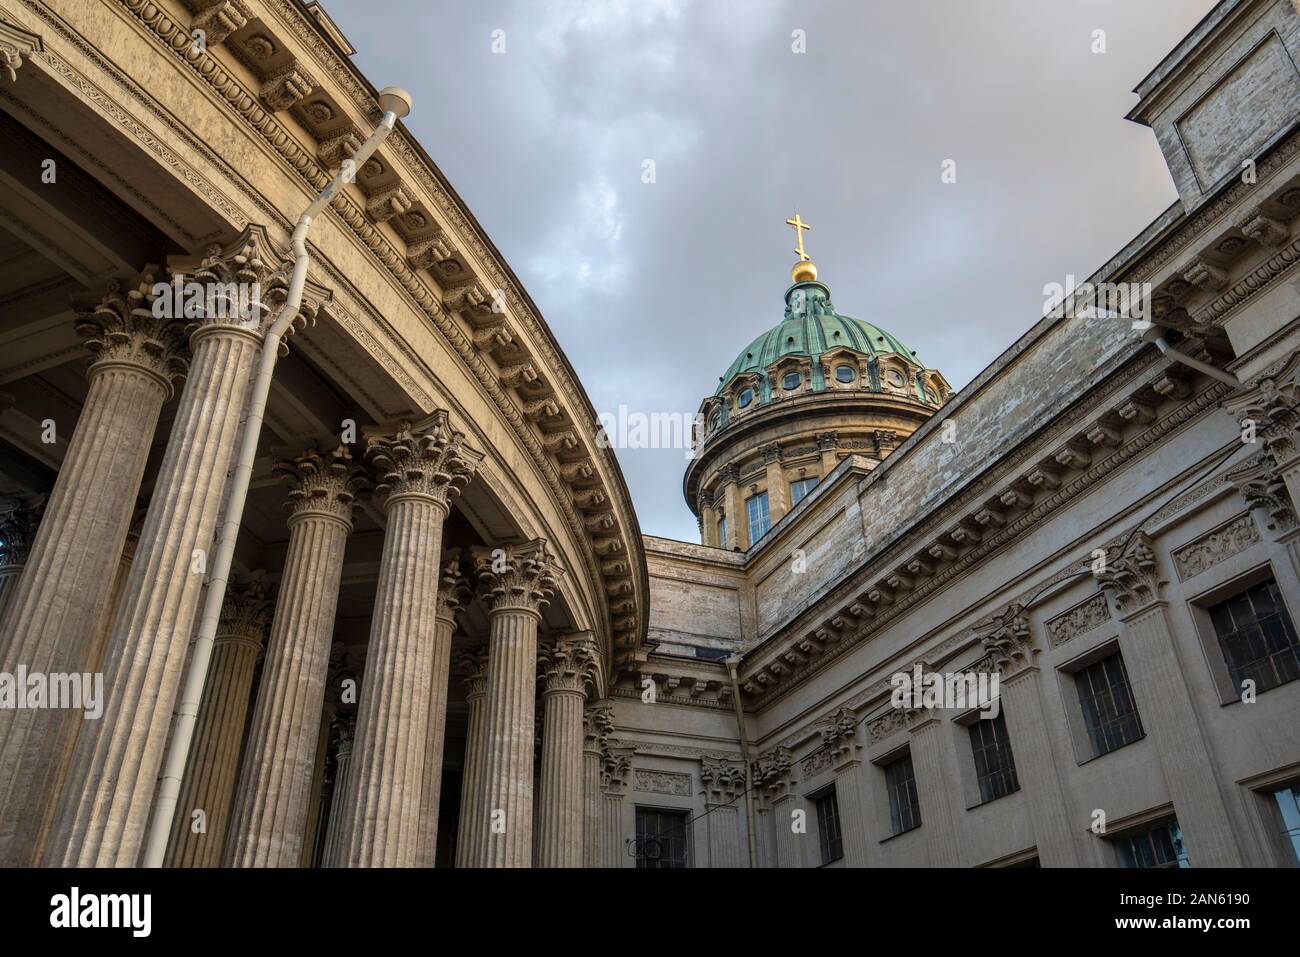 Kazan Cathedral or Kazanskiy Kafedralniy Sobor also known as the Cathedral of Our Lady of Kazan in Saint Petersburg, Russia at sunset Stock Photo